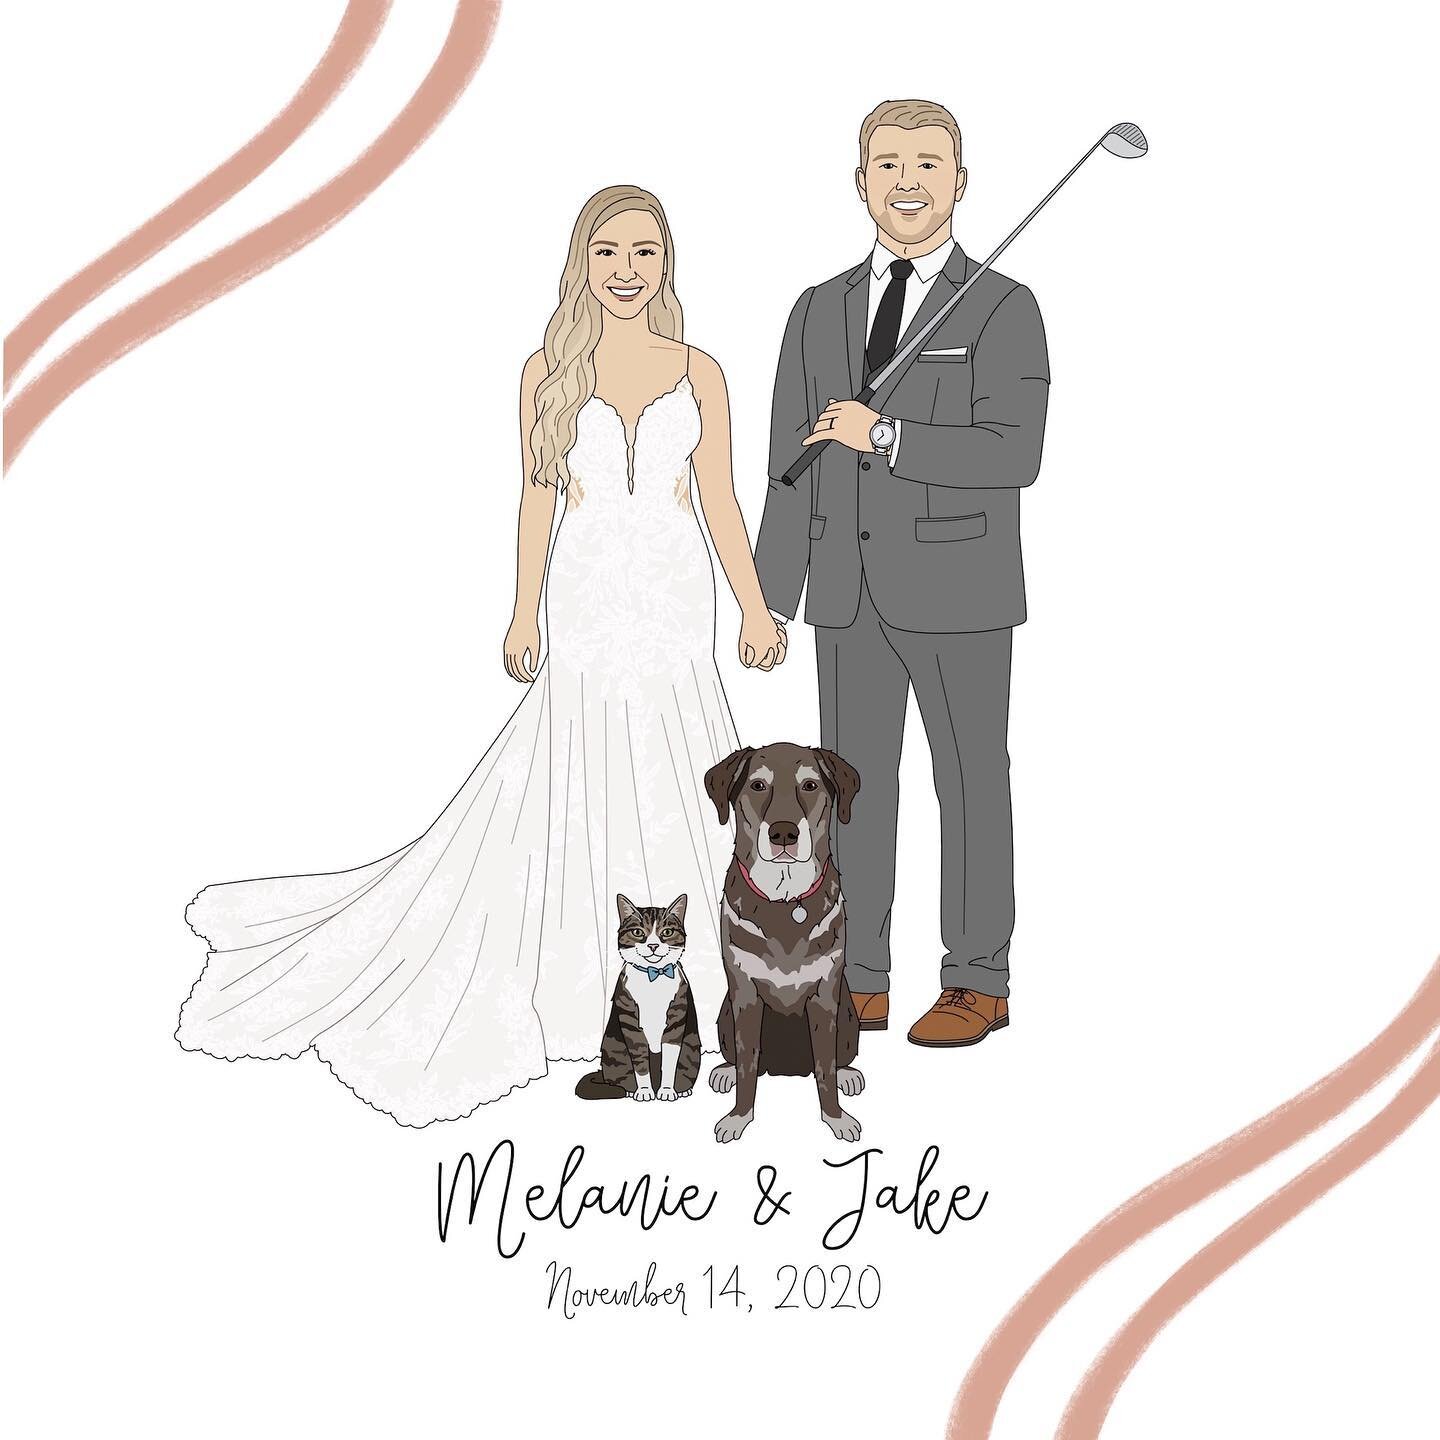 I have been wanting to share this illustration with you all for SO long, but I obviously needed to wait until after their wedding so this could remain a surprise for their guests. But as soon as Melanie filled out her reference form with photos of th